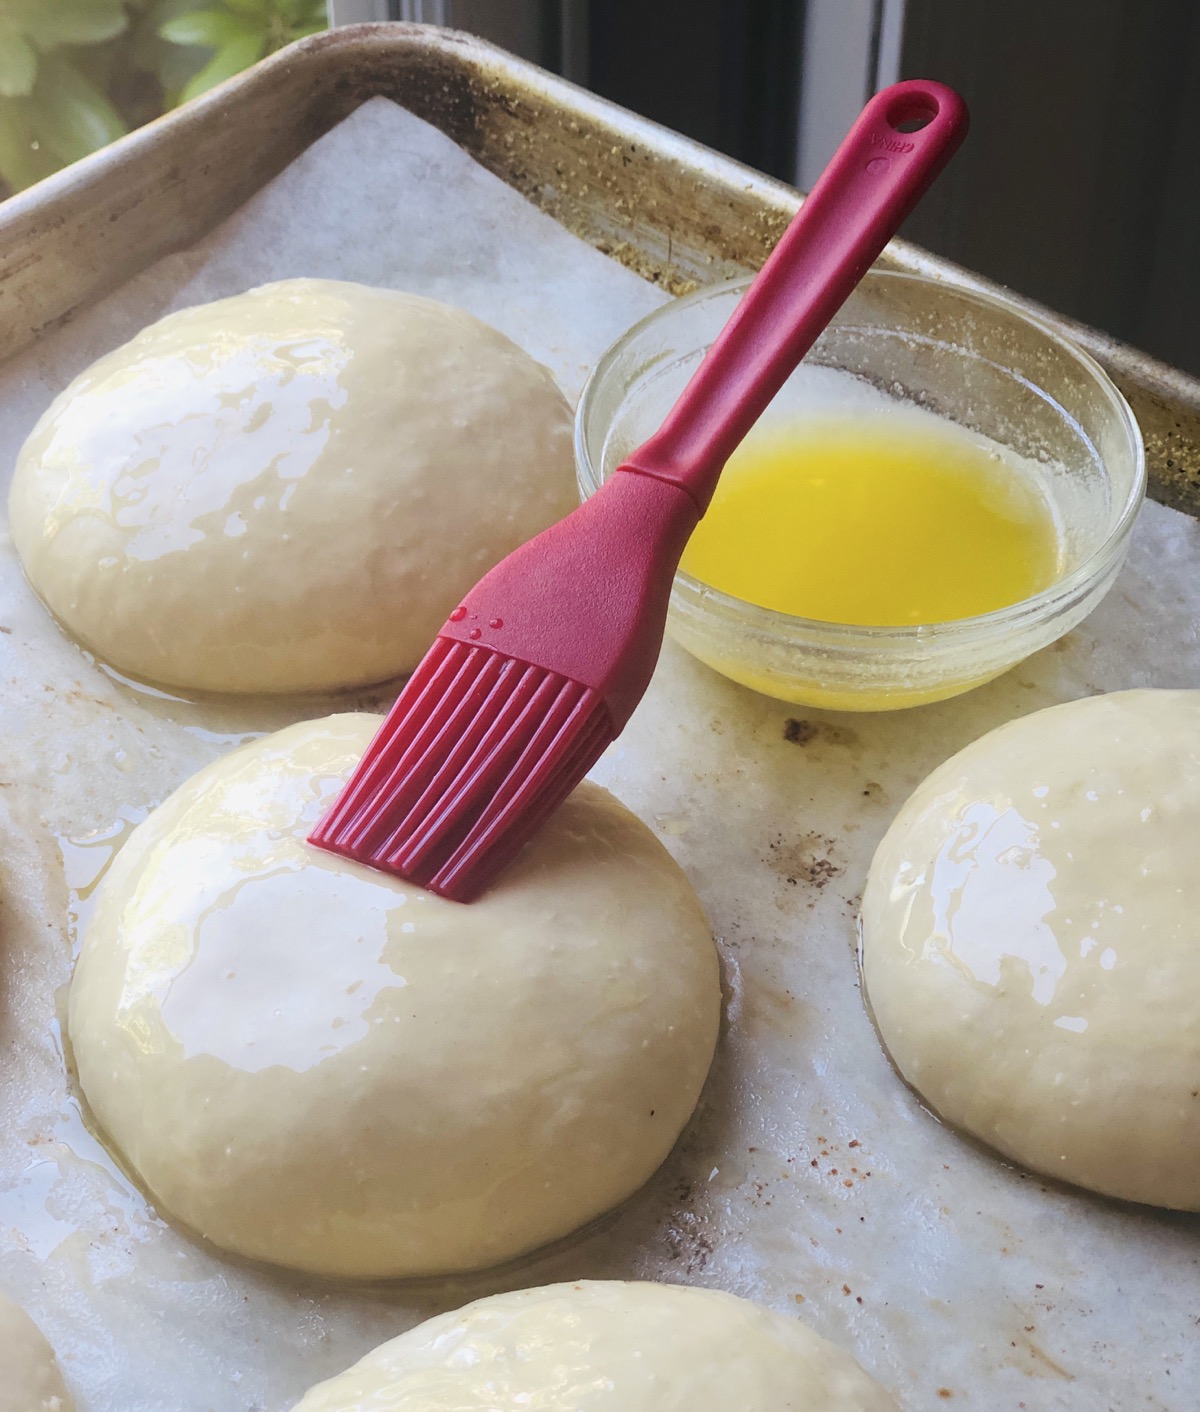 Risen  buns being brushed with melted butter using a red silicone pastry brush.